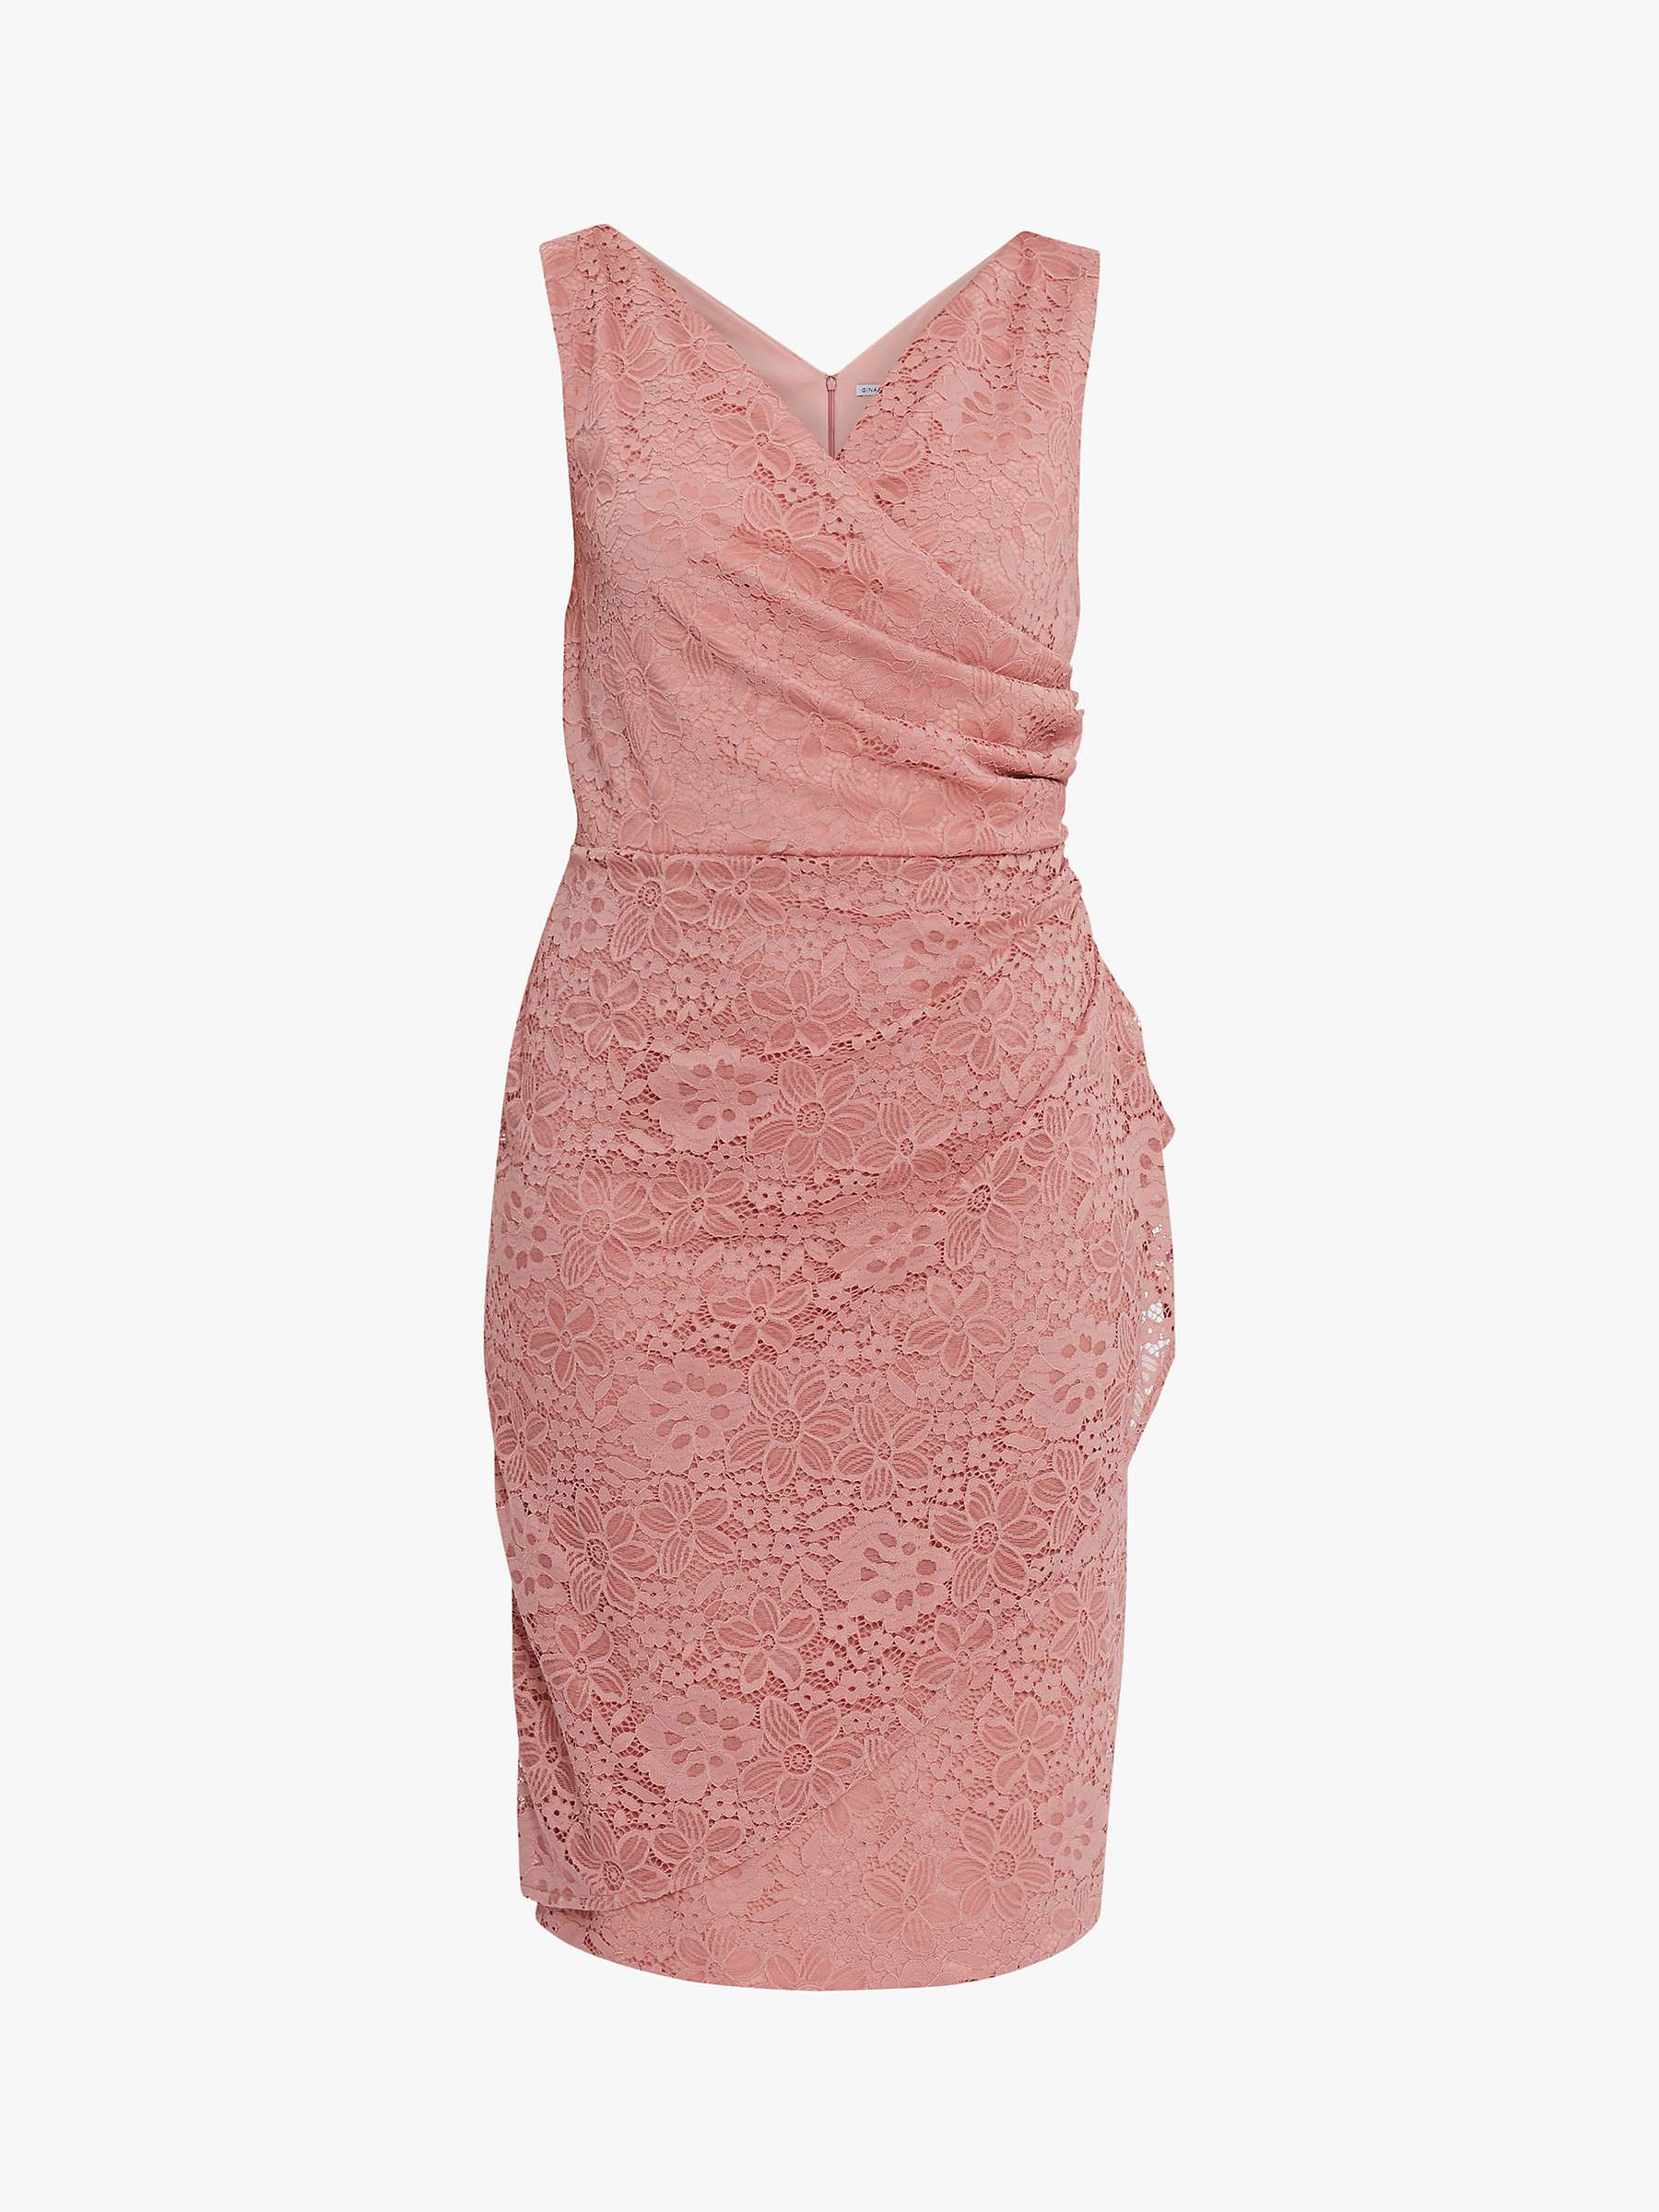 Buy Gina Bacconi Josette Floral Lace Sleeveless Dress Online at johnlewis.com